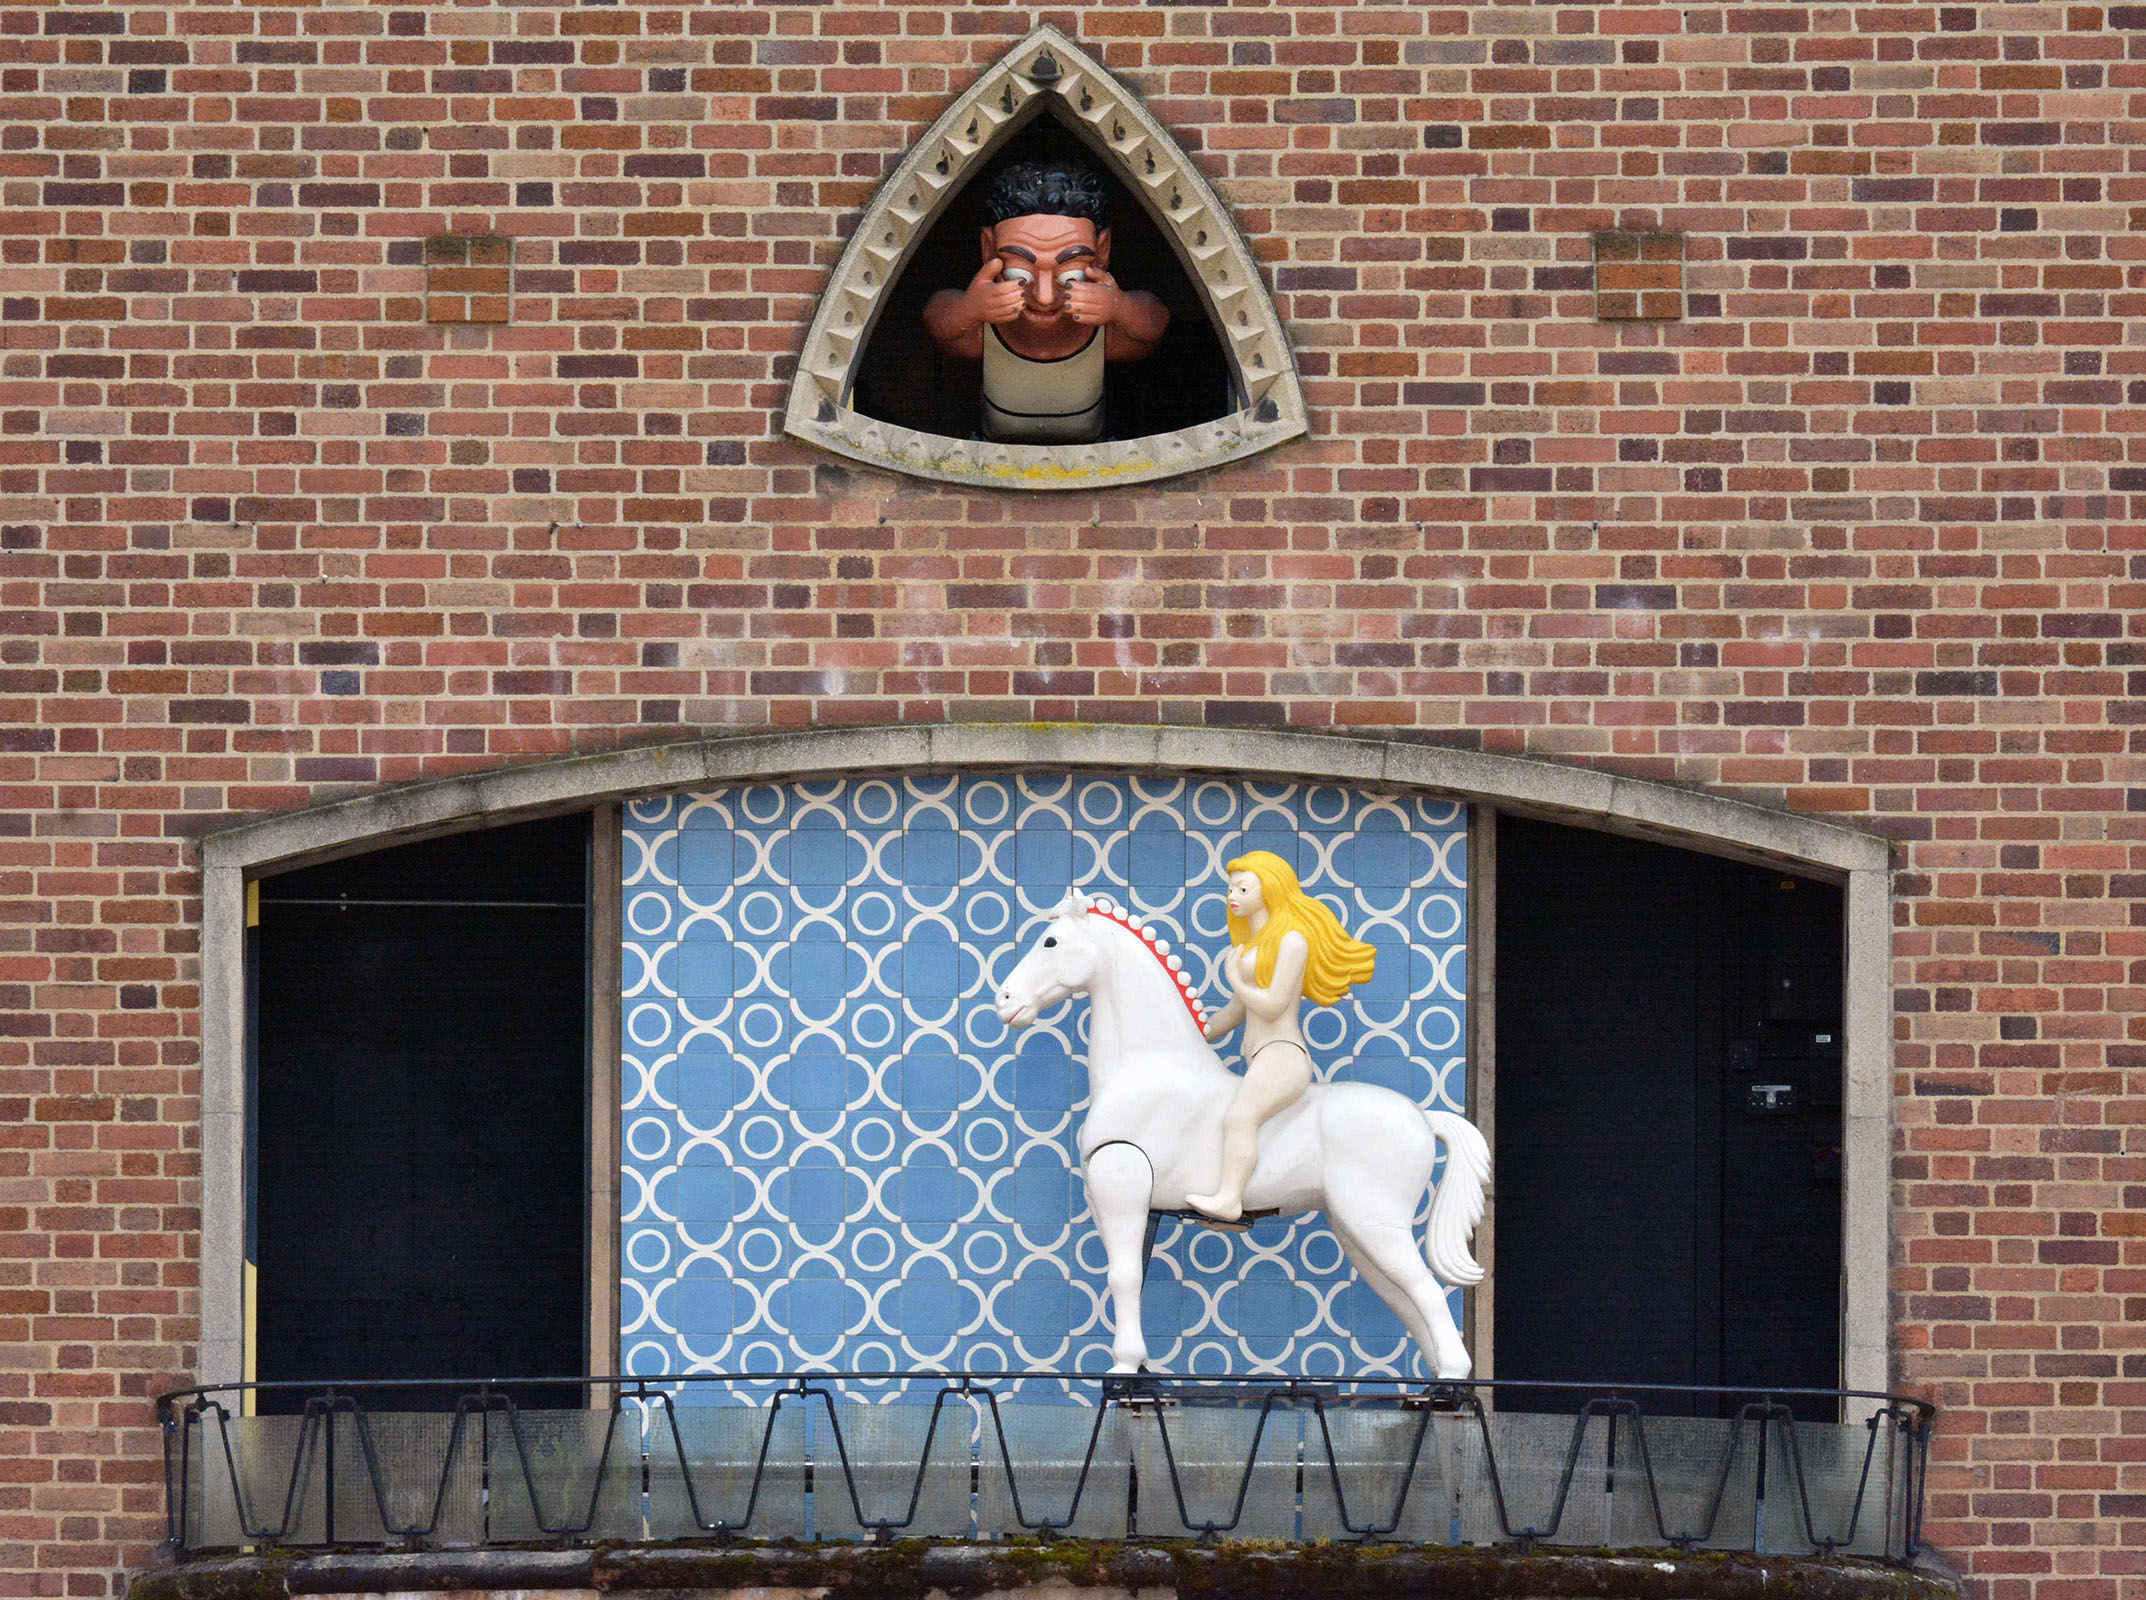 The ceramic Lady Godiva Clock installed on the side of Broadgate House, Coventry.